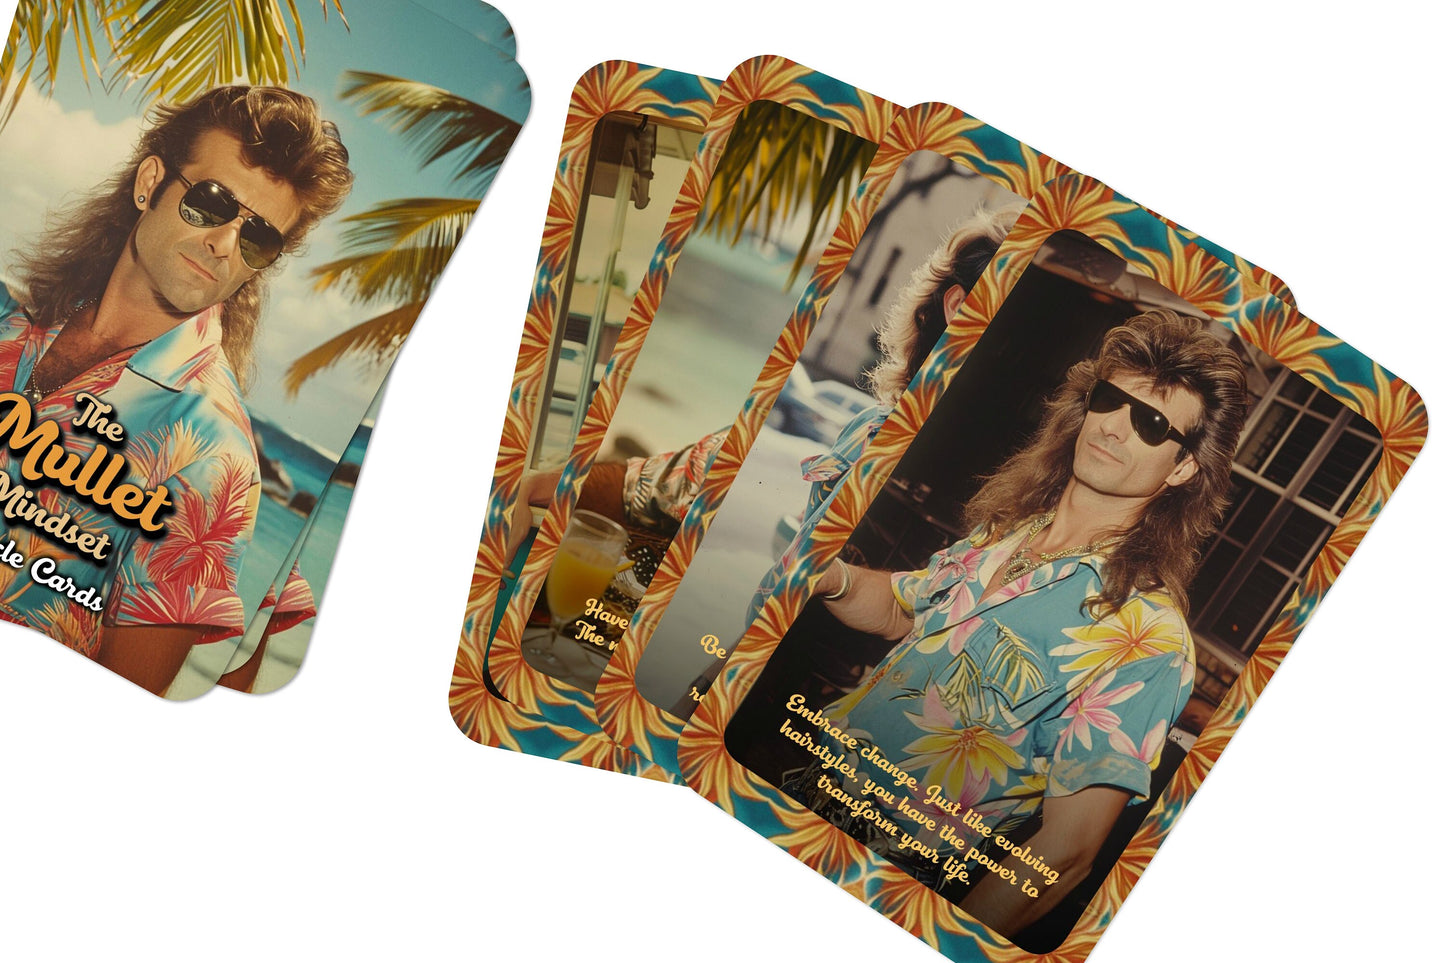 The Mullet Mindset - 80's Oracle Cards - 22 Cards - Novelty Gift